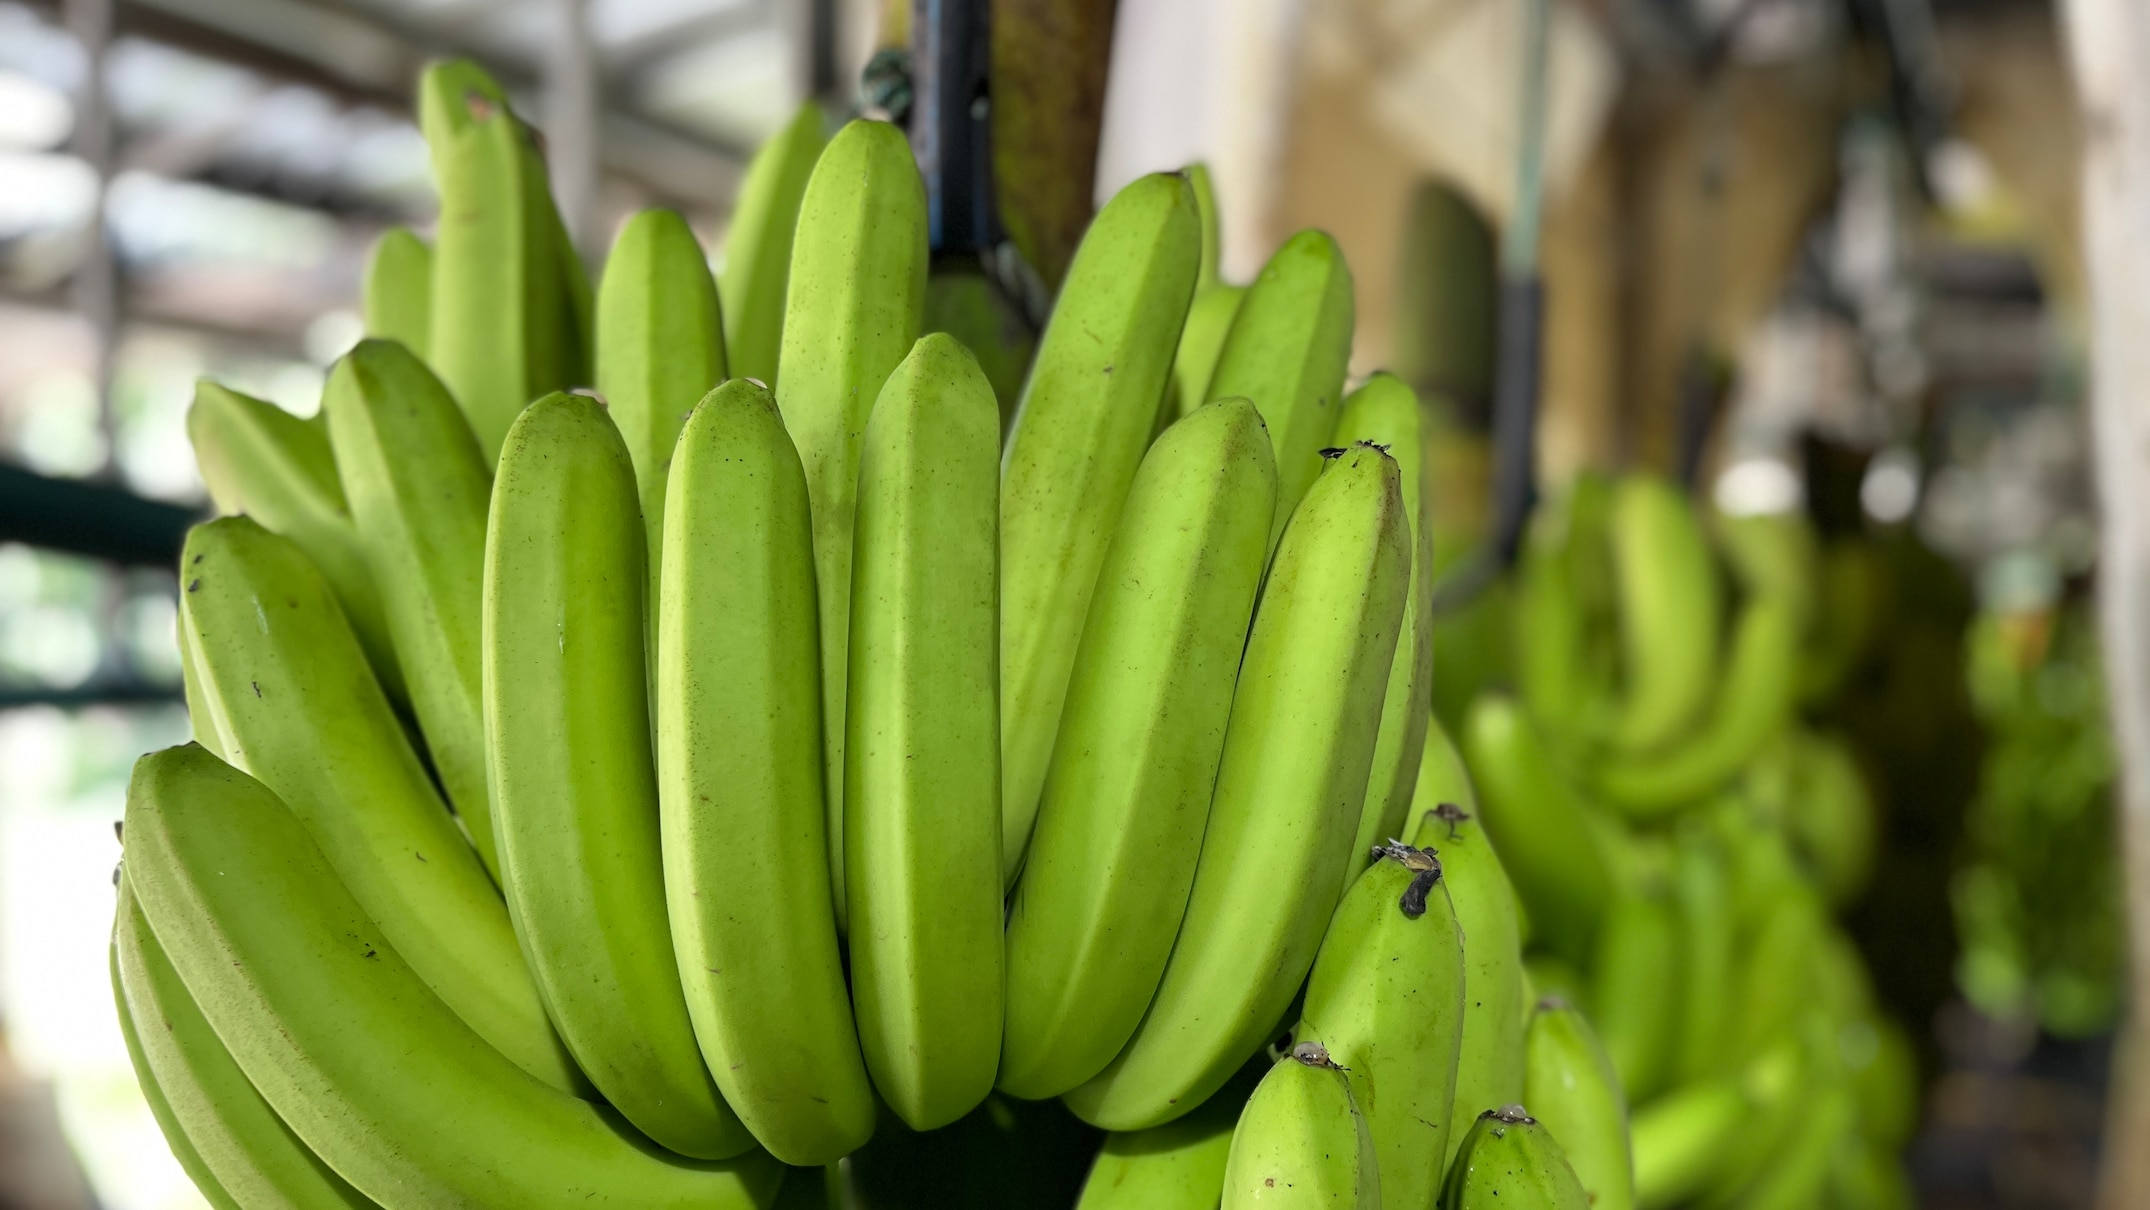 banana industry turns to robots and ai for 'dangerous' packing-shed task of cutting fruit from stem